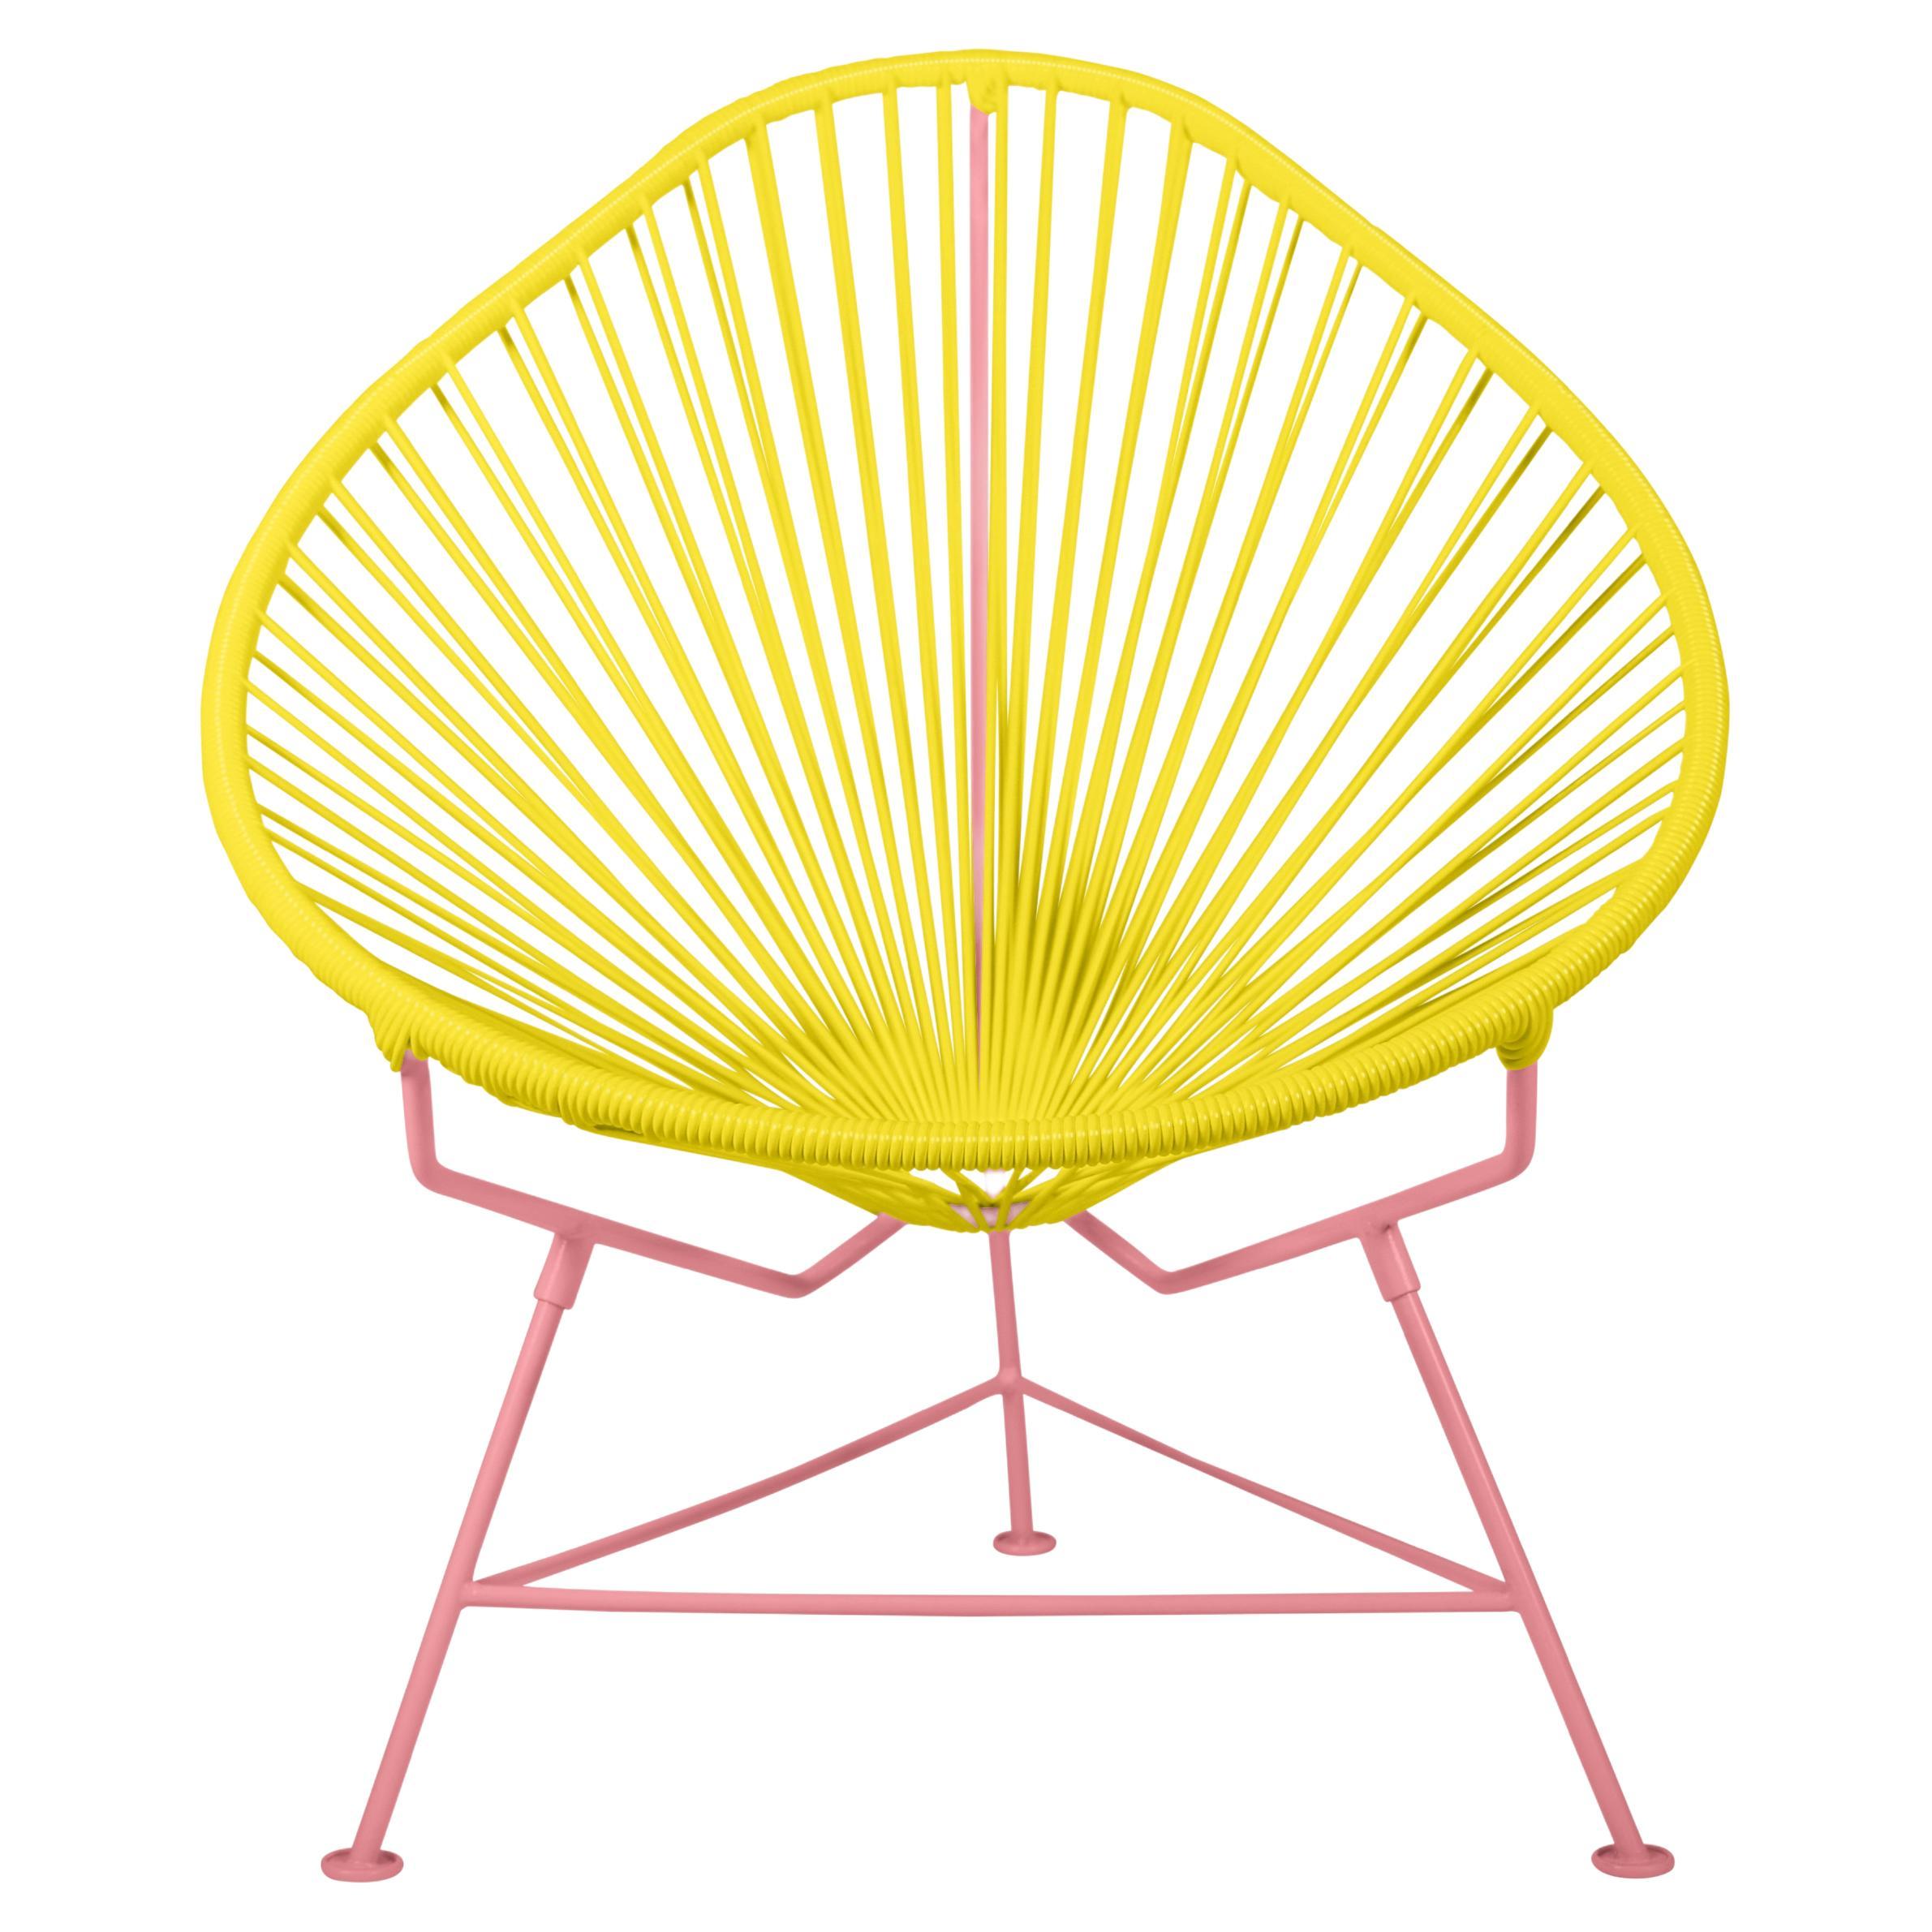 Innit Designs Acapulco Chair Yellow Weave on Coral Frame For Sale